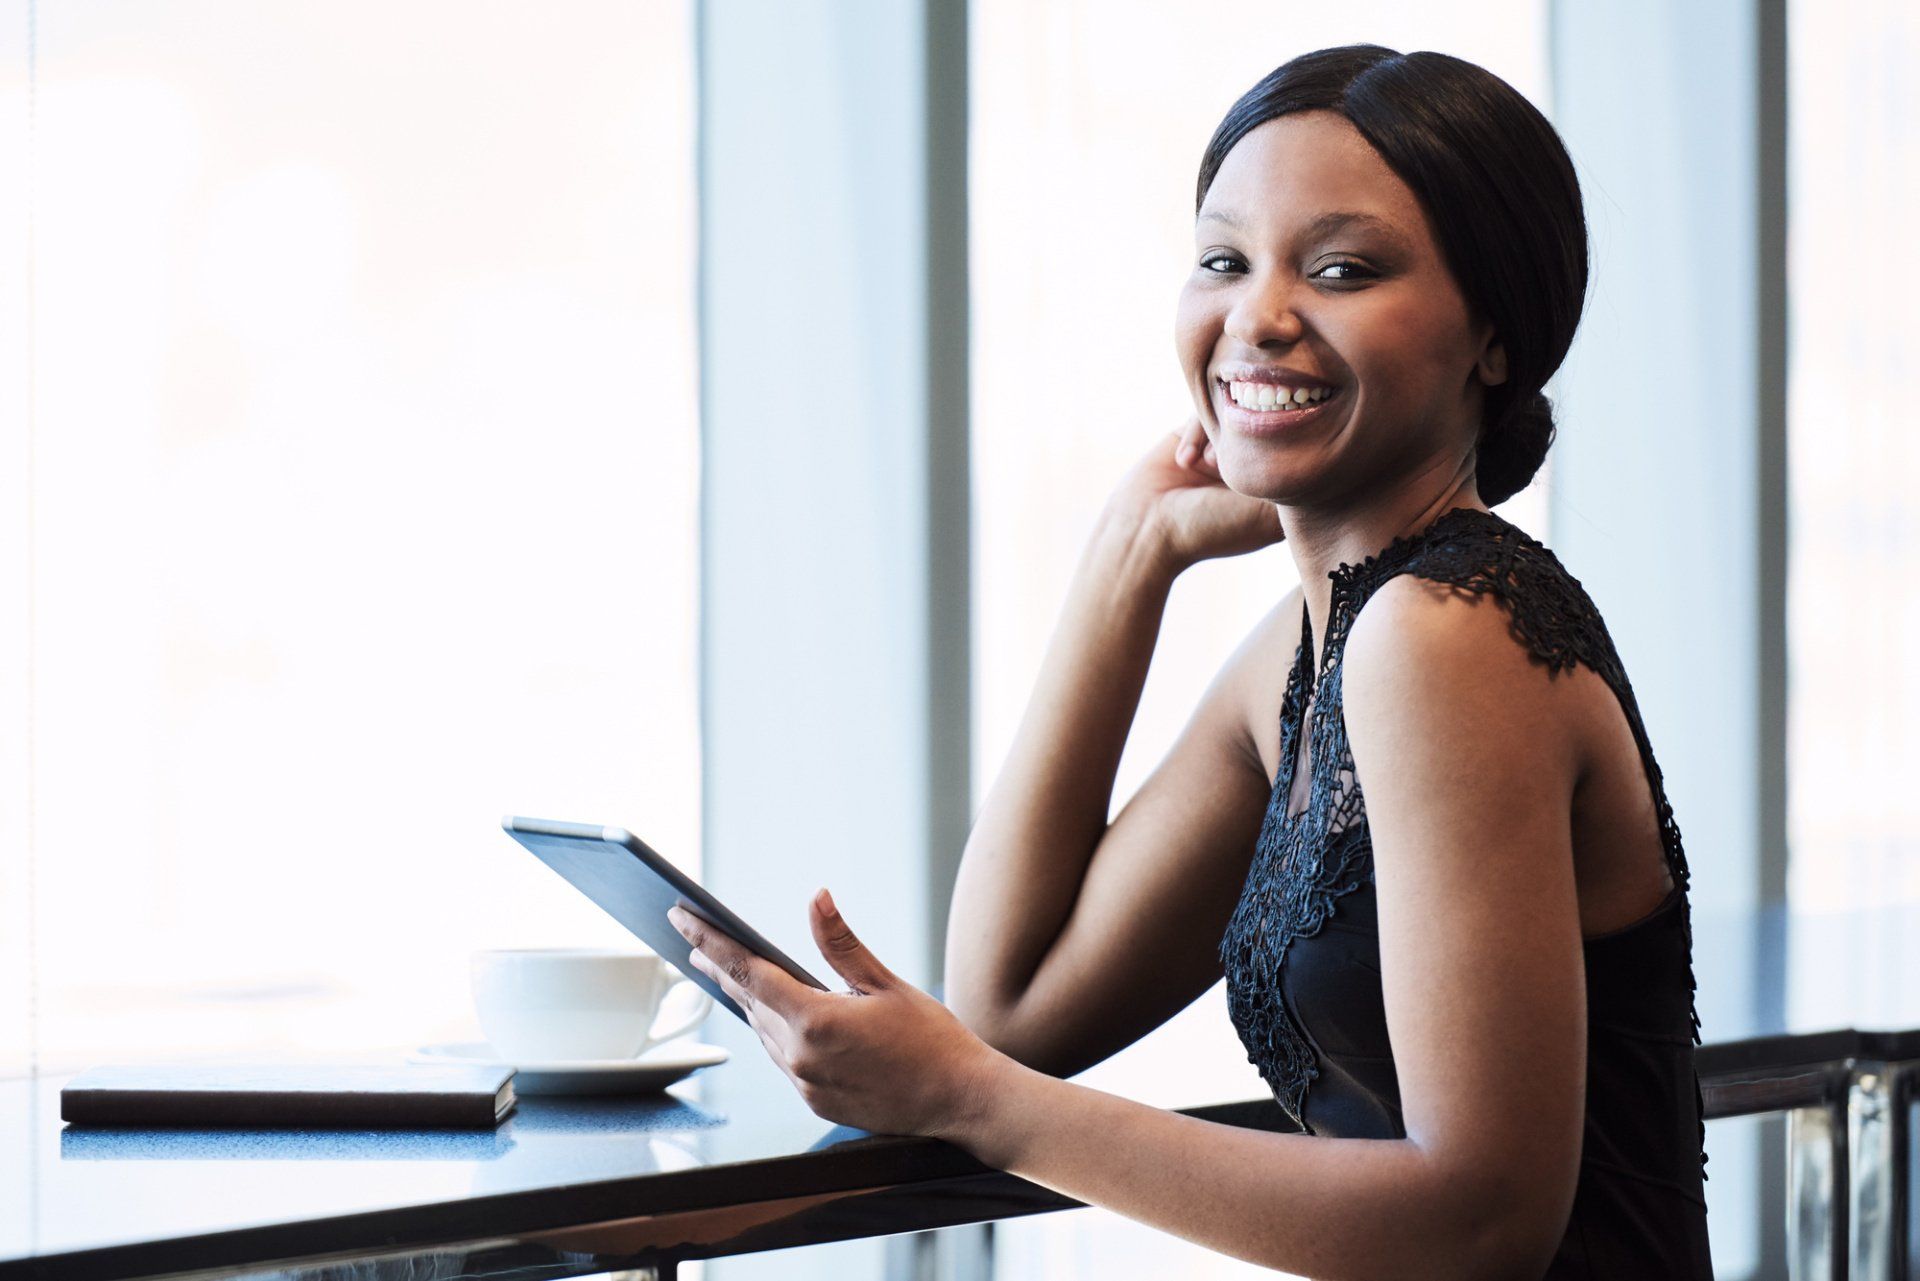 Check out this guide to discover 6 resources every black entrepreneur should leverage, including fun